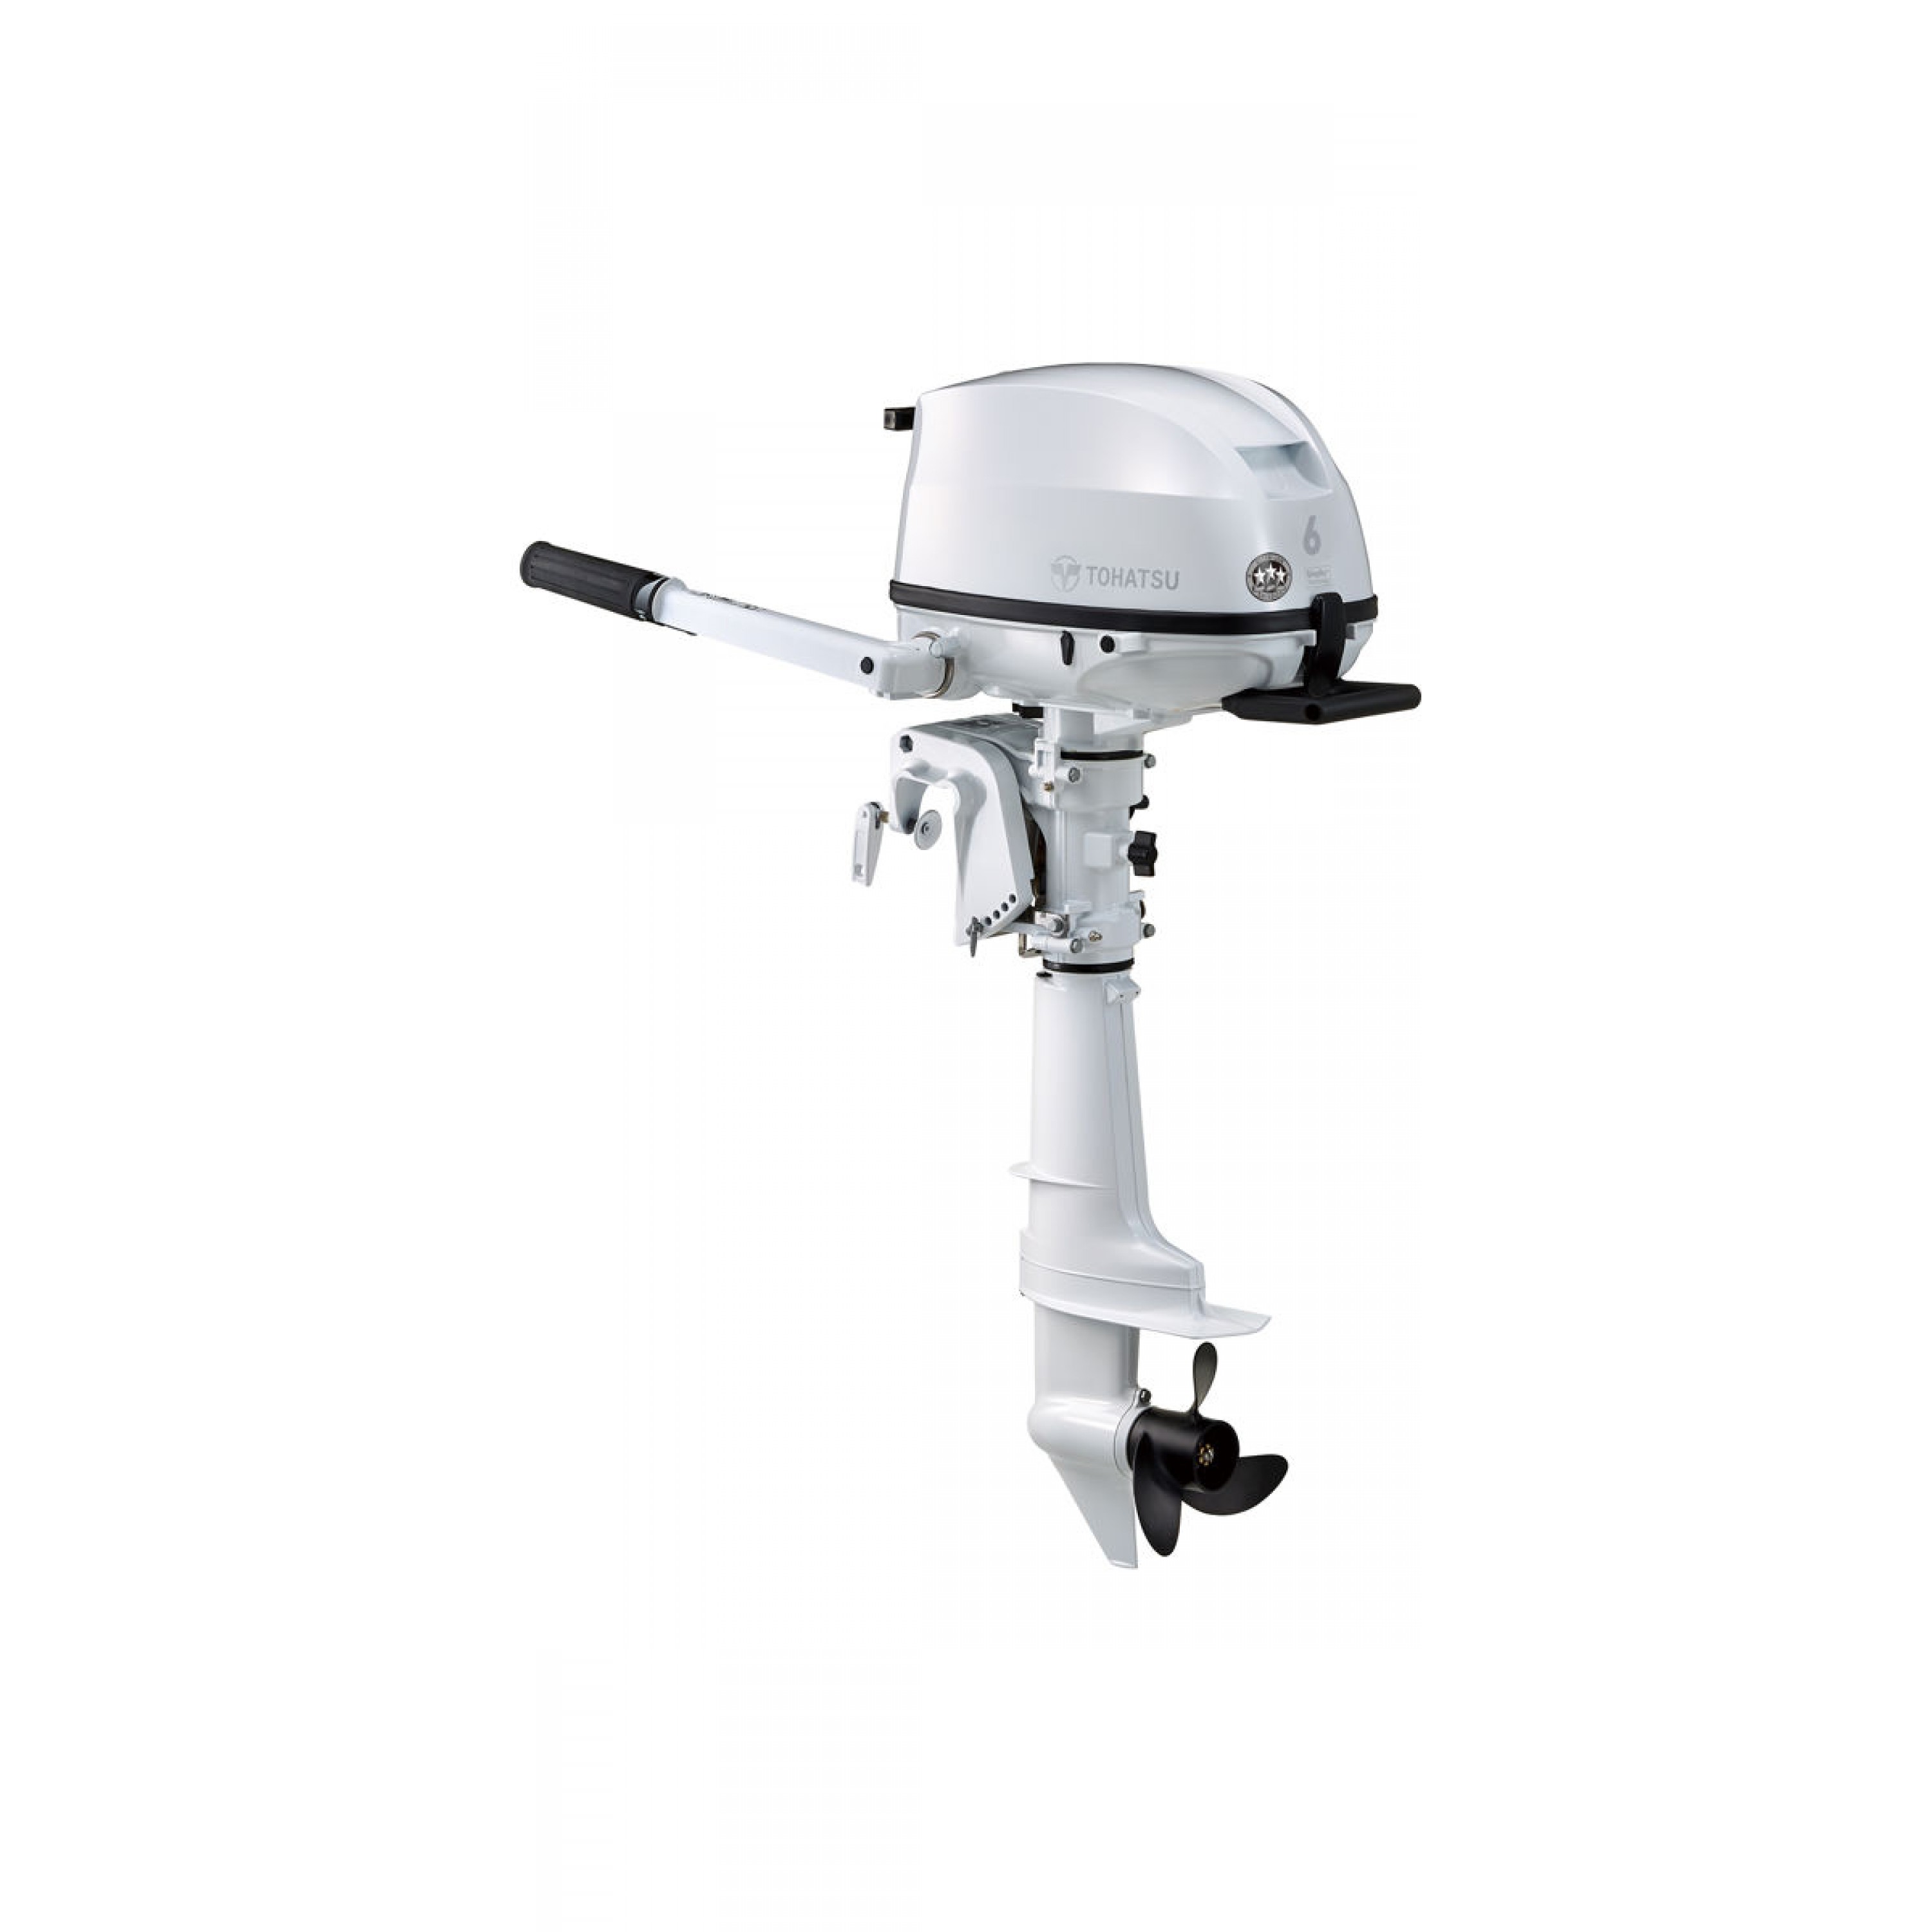 6 HP, TOHATSU OUTBOARD, MFS6DWSPROUL, WHITE, CARB, 25IN, TILLER, FUEL TANK INC, MANUAL START, 12V RECHARGE